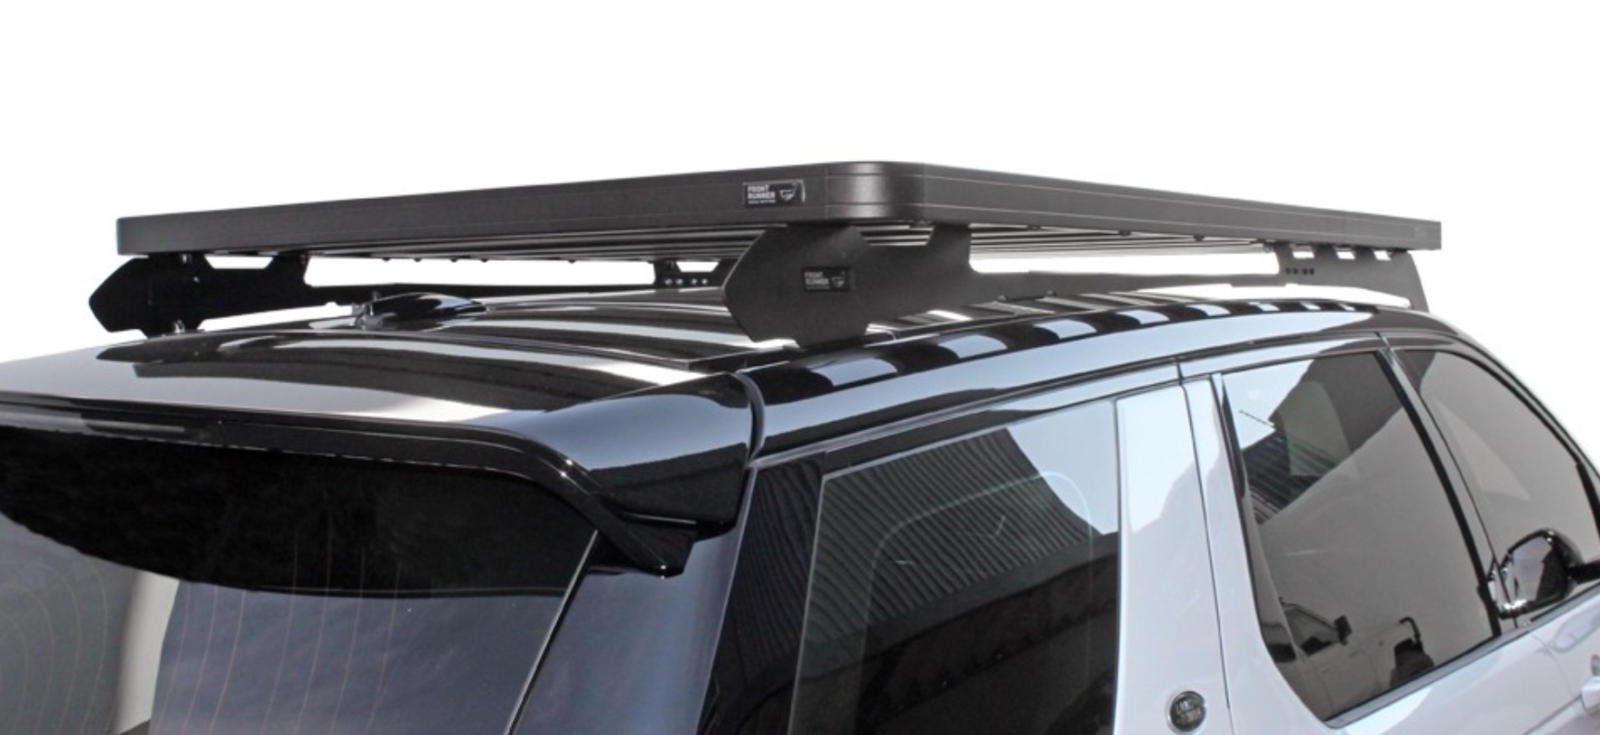 Download LAND ROVER DISCOVERY SPORT SLIMLINE II ROOF RACK KIT - BY ...